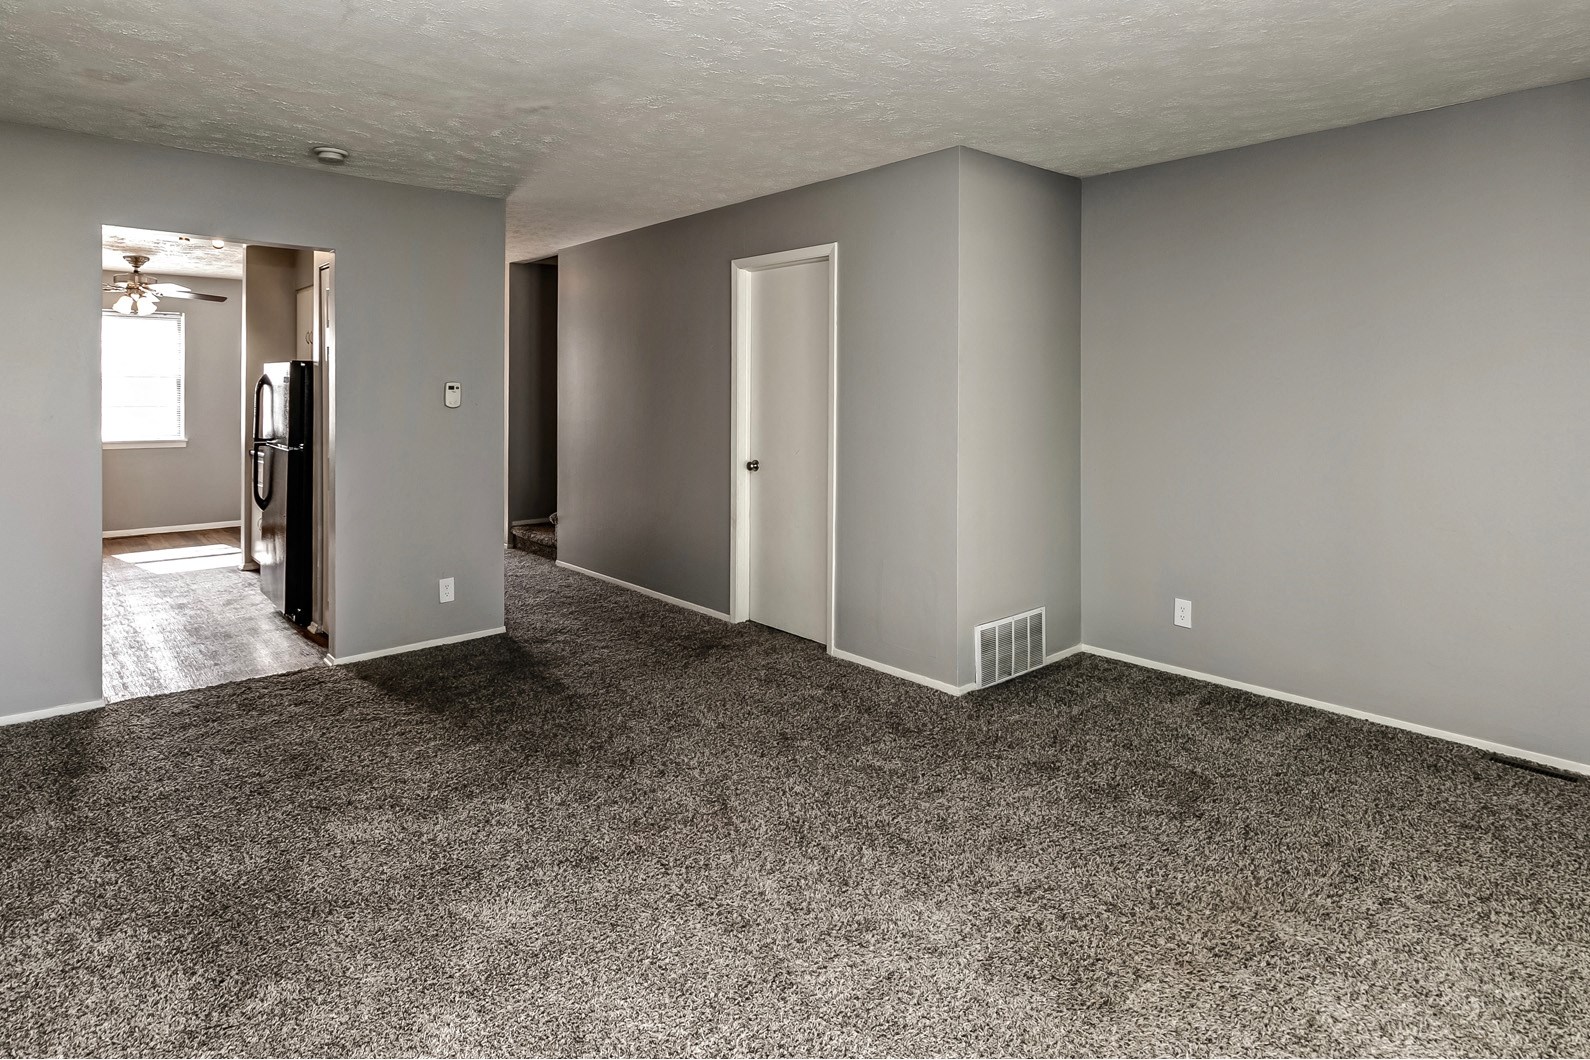 Large carpeted living room at Terrace Garden Townhomes